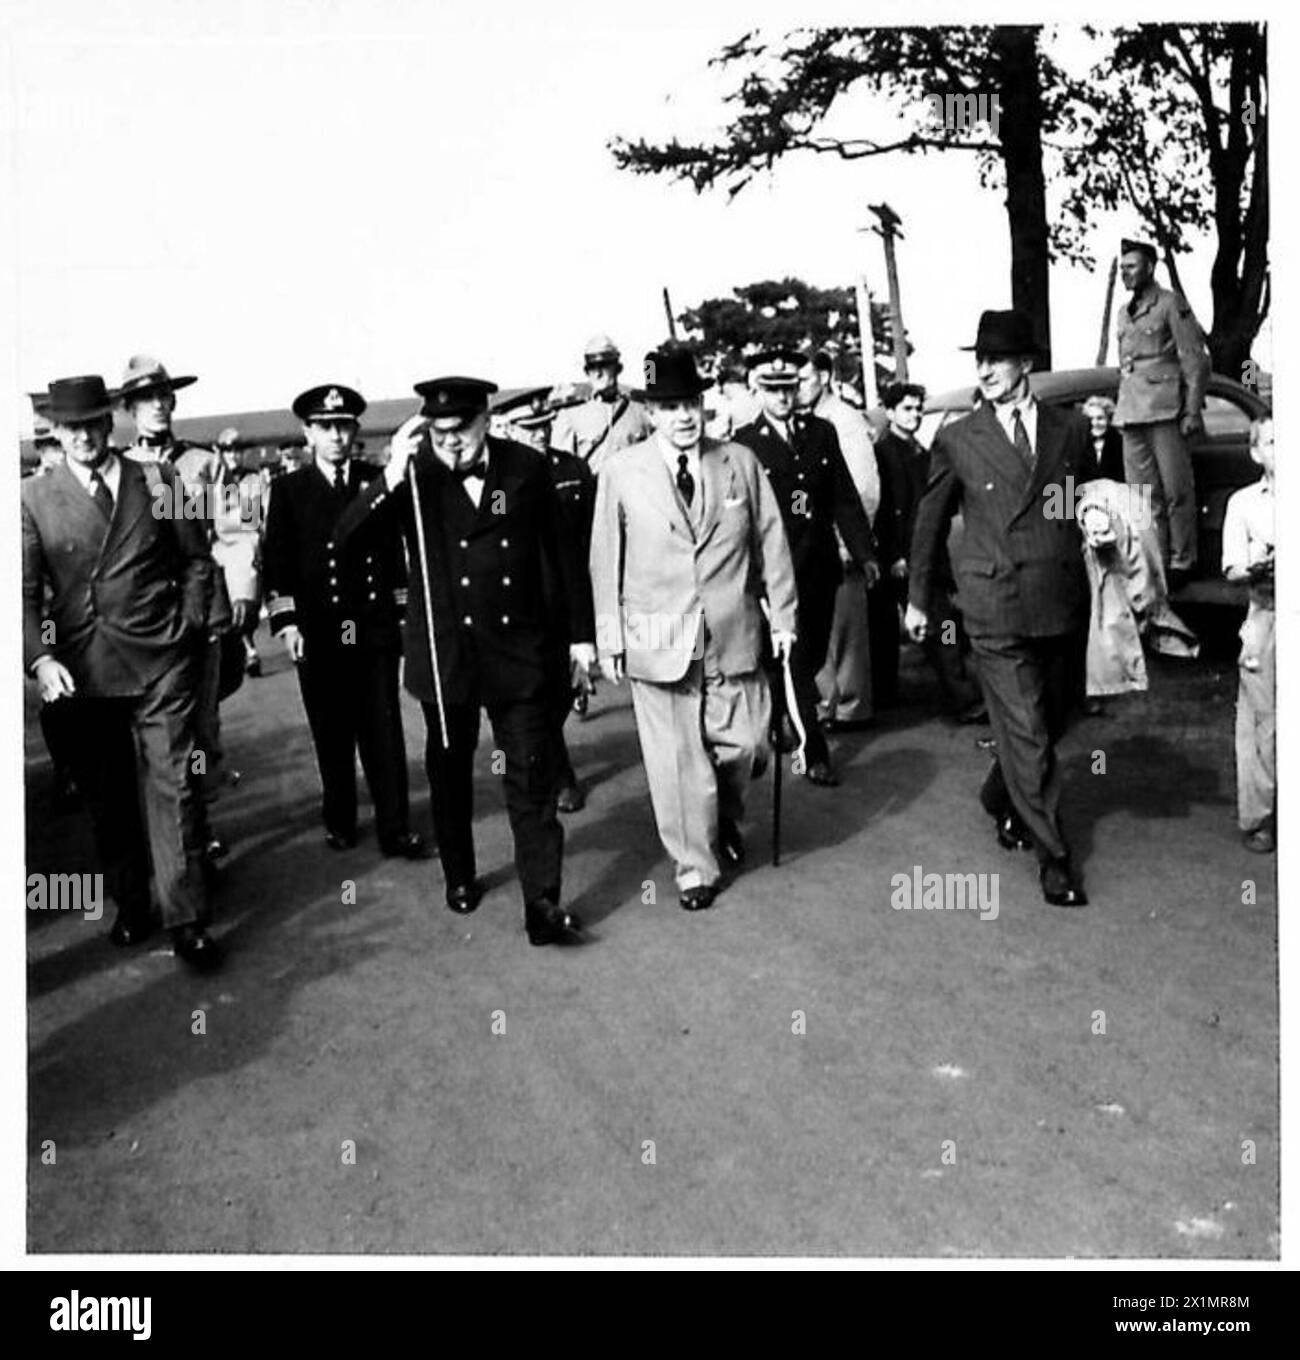 MR. CHURCHILL IN CANADA - Mr. Churchill and Mr. MacKenzie King walking through the enthusiastic crowd of people which had assembled to watch his arrival, British Army Stock Photo